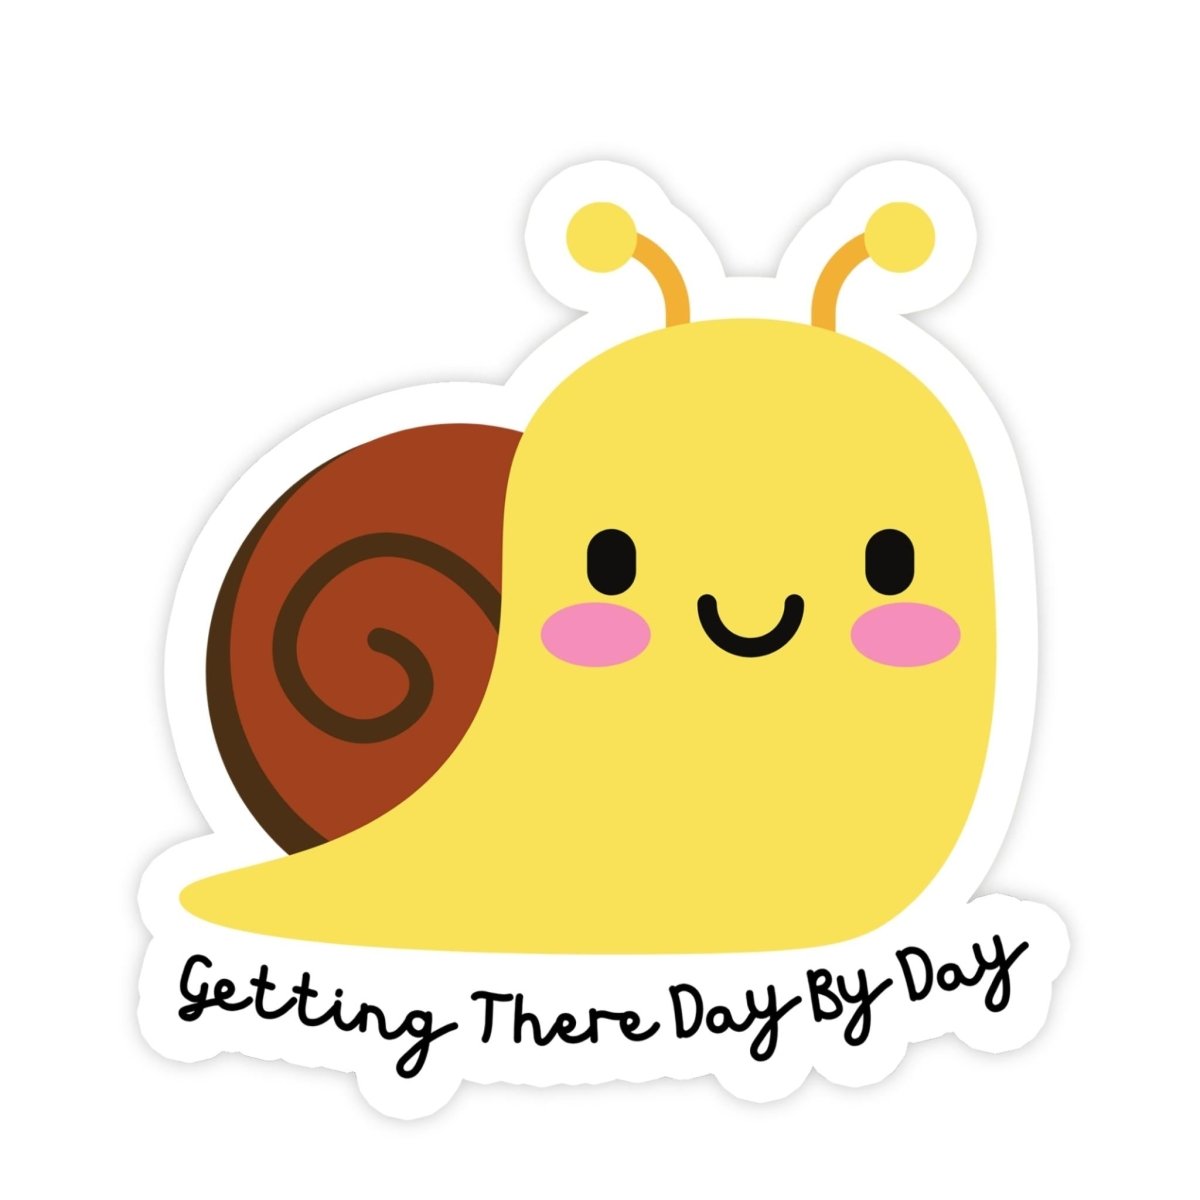 Getting There Day By Day Mental Health Snail Sticker - stickerbullGetting There Day By Day Mental Health Snail StickerRetail StickerstickerbullstickerbullTaylor_DayByDaySnail[#53]Getting There Day By Day Mental Health Snail Sticker